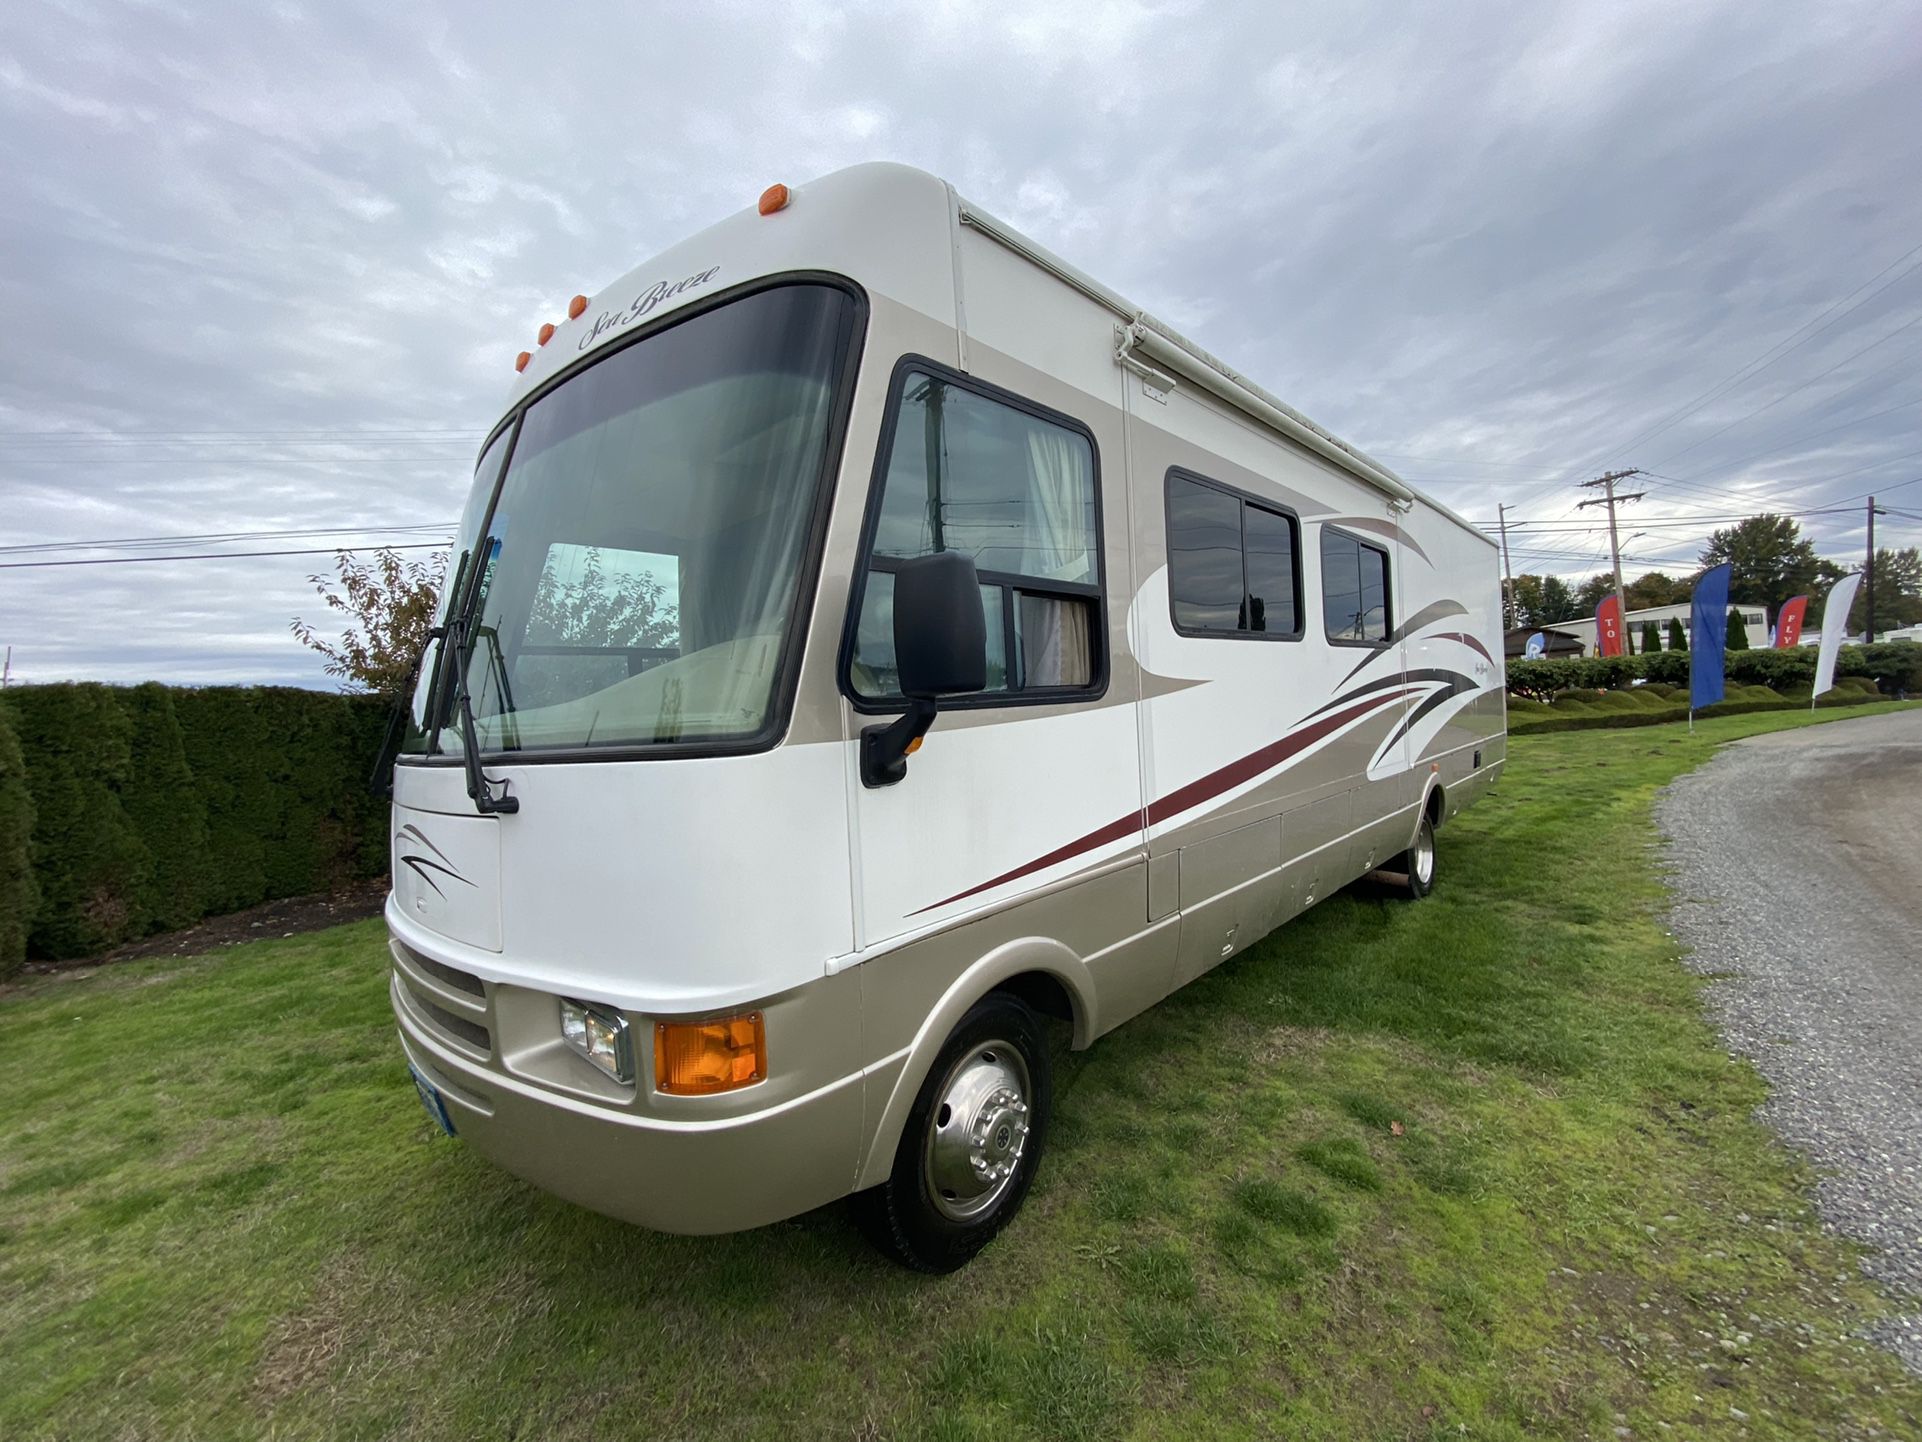 2006 Seabreeze  motorhome 30 foot  with two slide outs low miles